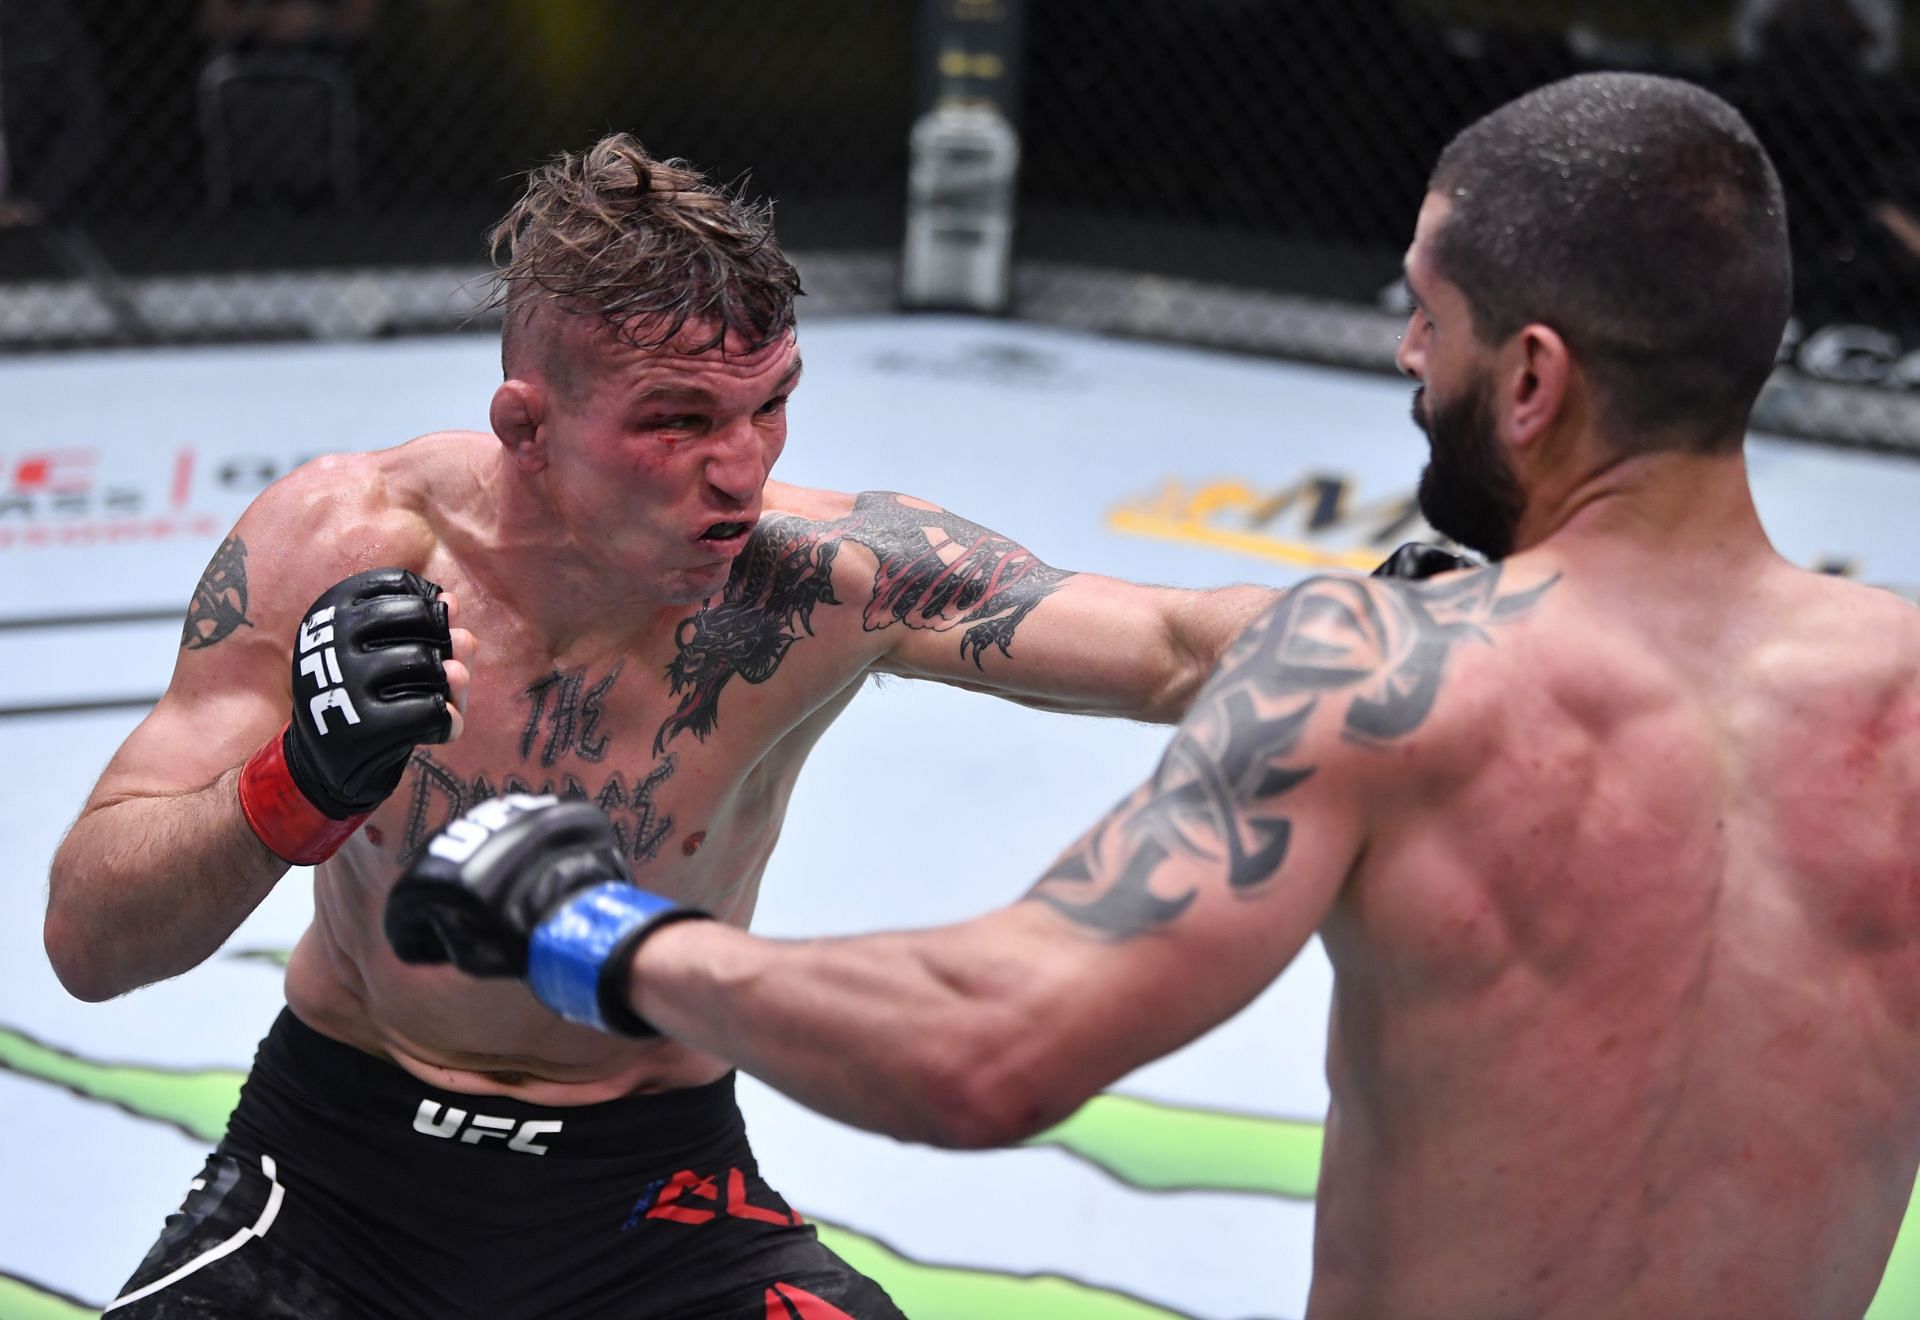 Darren Elkins rarely fails to deliver wild action in the octagon